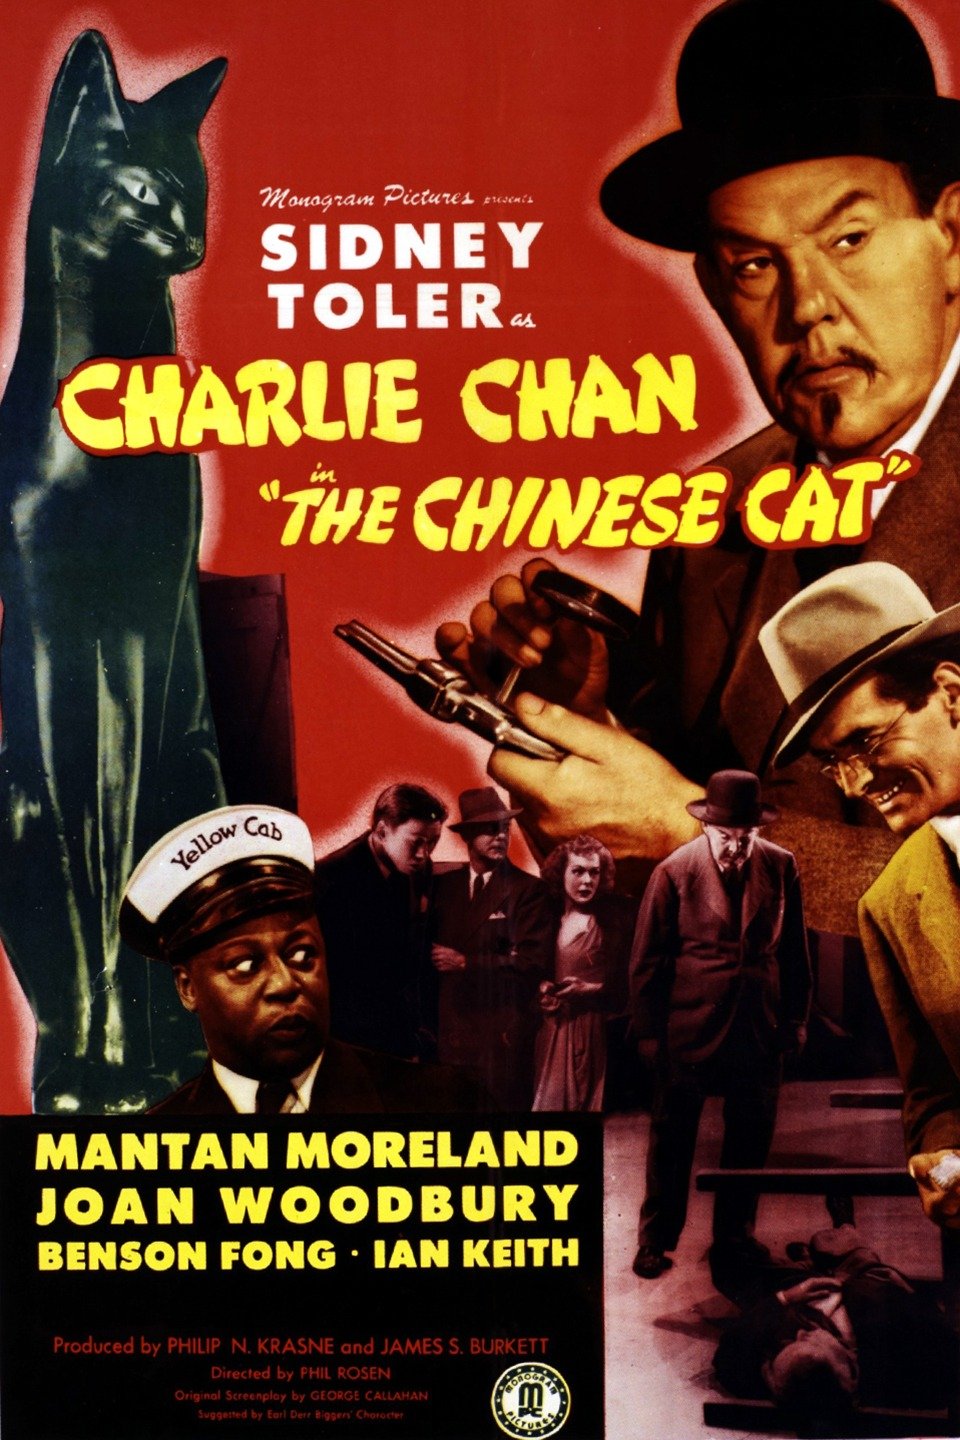 CHARLIE CHAN IN THE CHINESE CAT (1944)